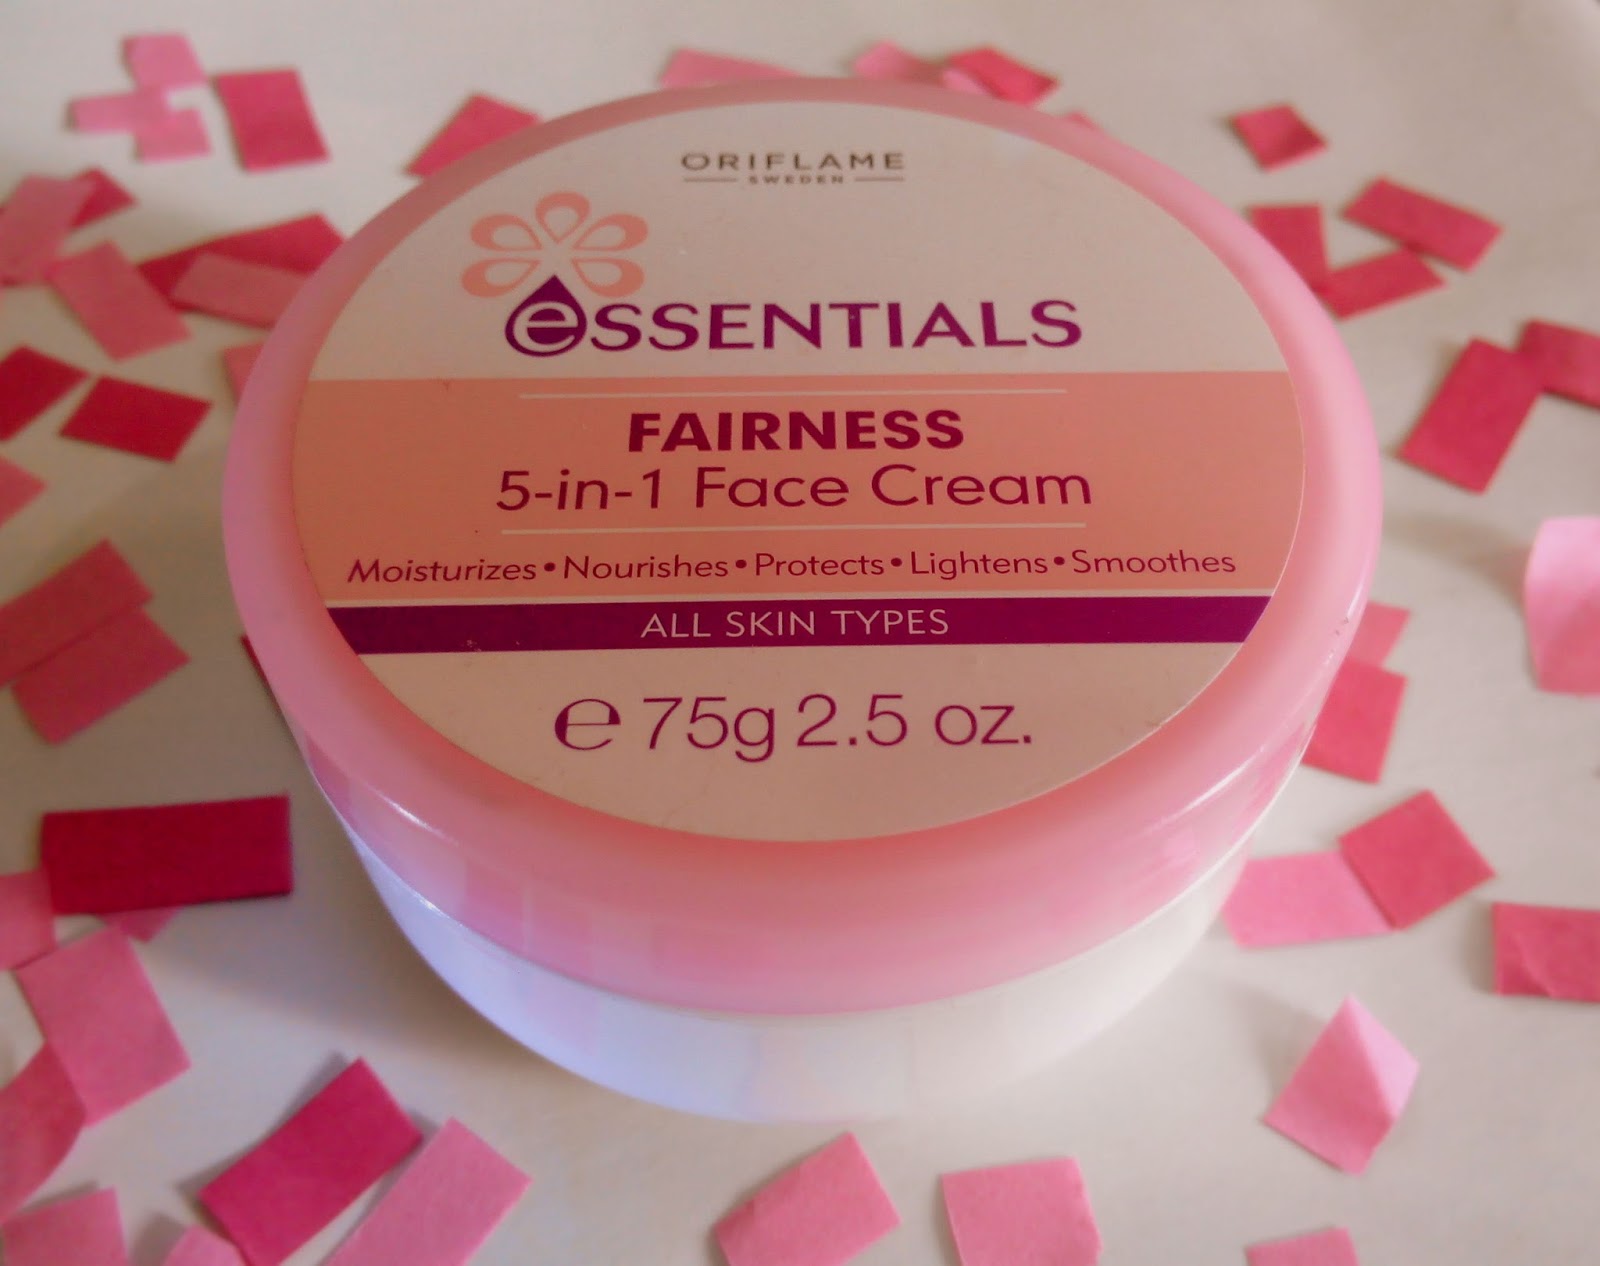 Will I Buy It ?: Oriflame essentials 5 in 1 fairness face cream review